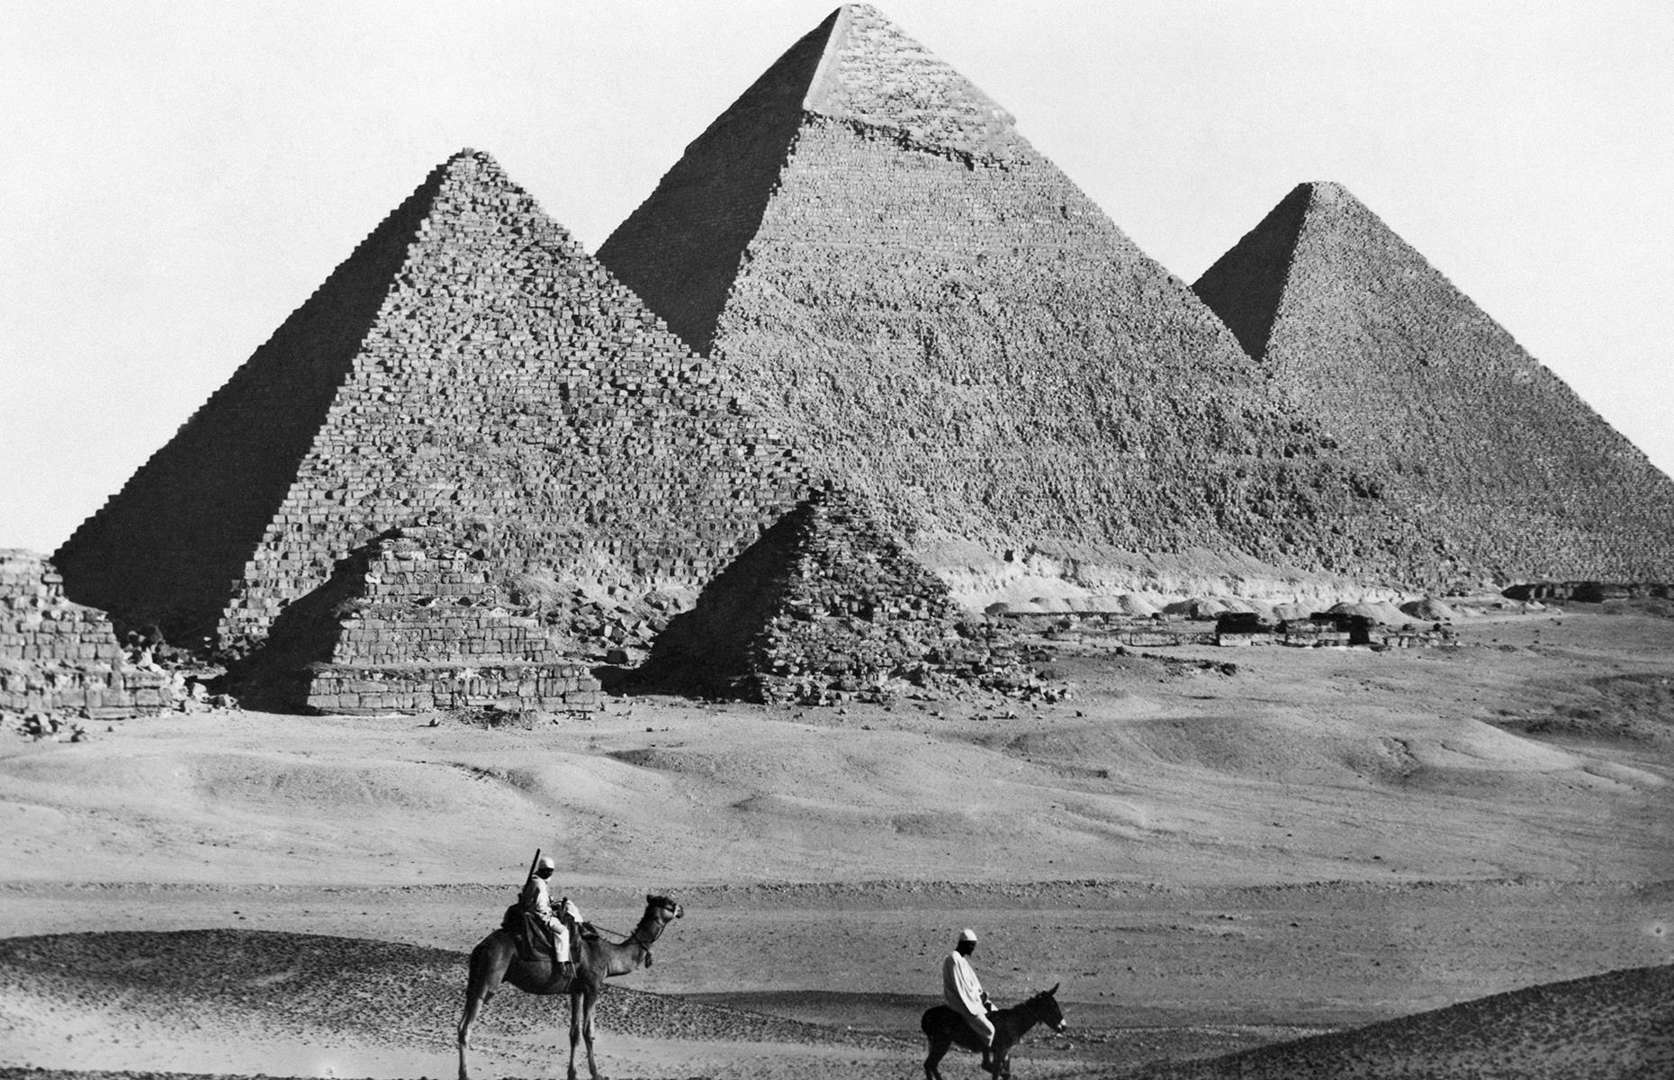 Slide 4 of 41: If this photo wasn't black and white, you'd probably think it was a modern-day shot. That's because the colossal Pyramids of Giza – built around 4,500 years ago – have changed little over the past centuries. They didn't always look like this, though. According to Smithsonian, the limestone was originally worked and smoothed with a sandstone brick, leaving a polished white finish that glinted in the sun. This picture captures the much more familiar, weather-beaten structures sometime in the late 1800s or early 1900s.